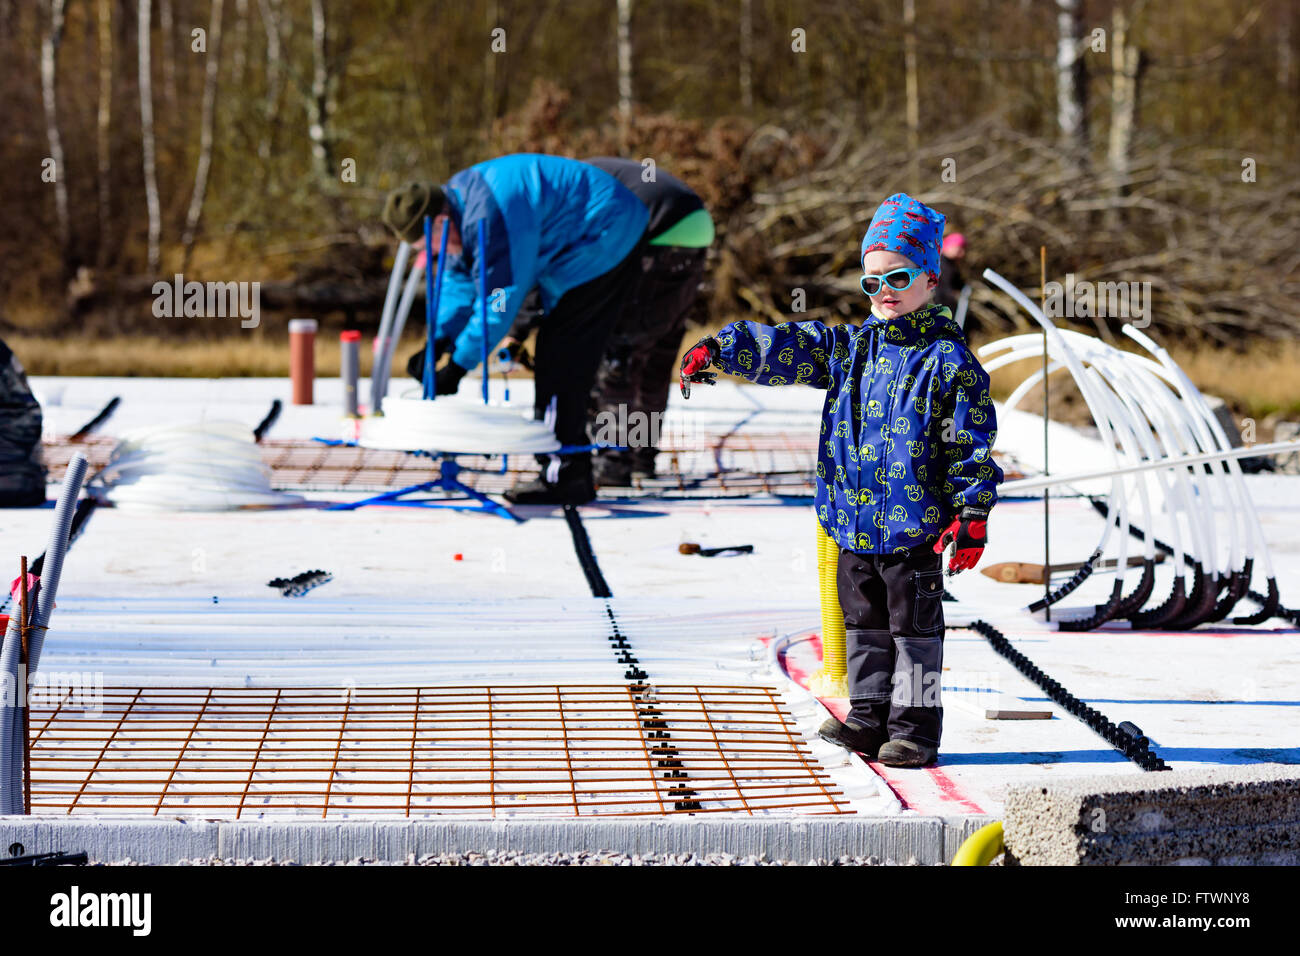 Ronneby, Sweden - March 26, 2016: Young boy directing and pointing at a construction site. Adults in background working. Boy wea Stock Photo